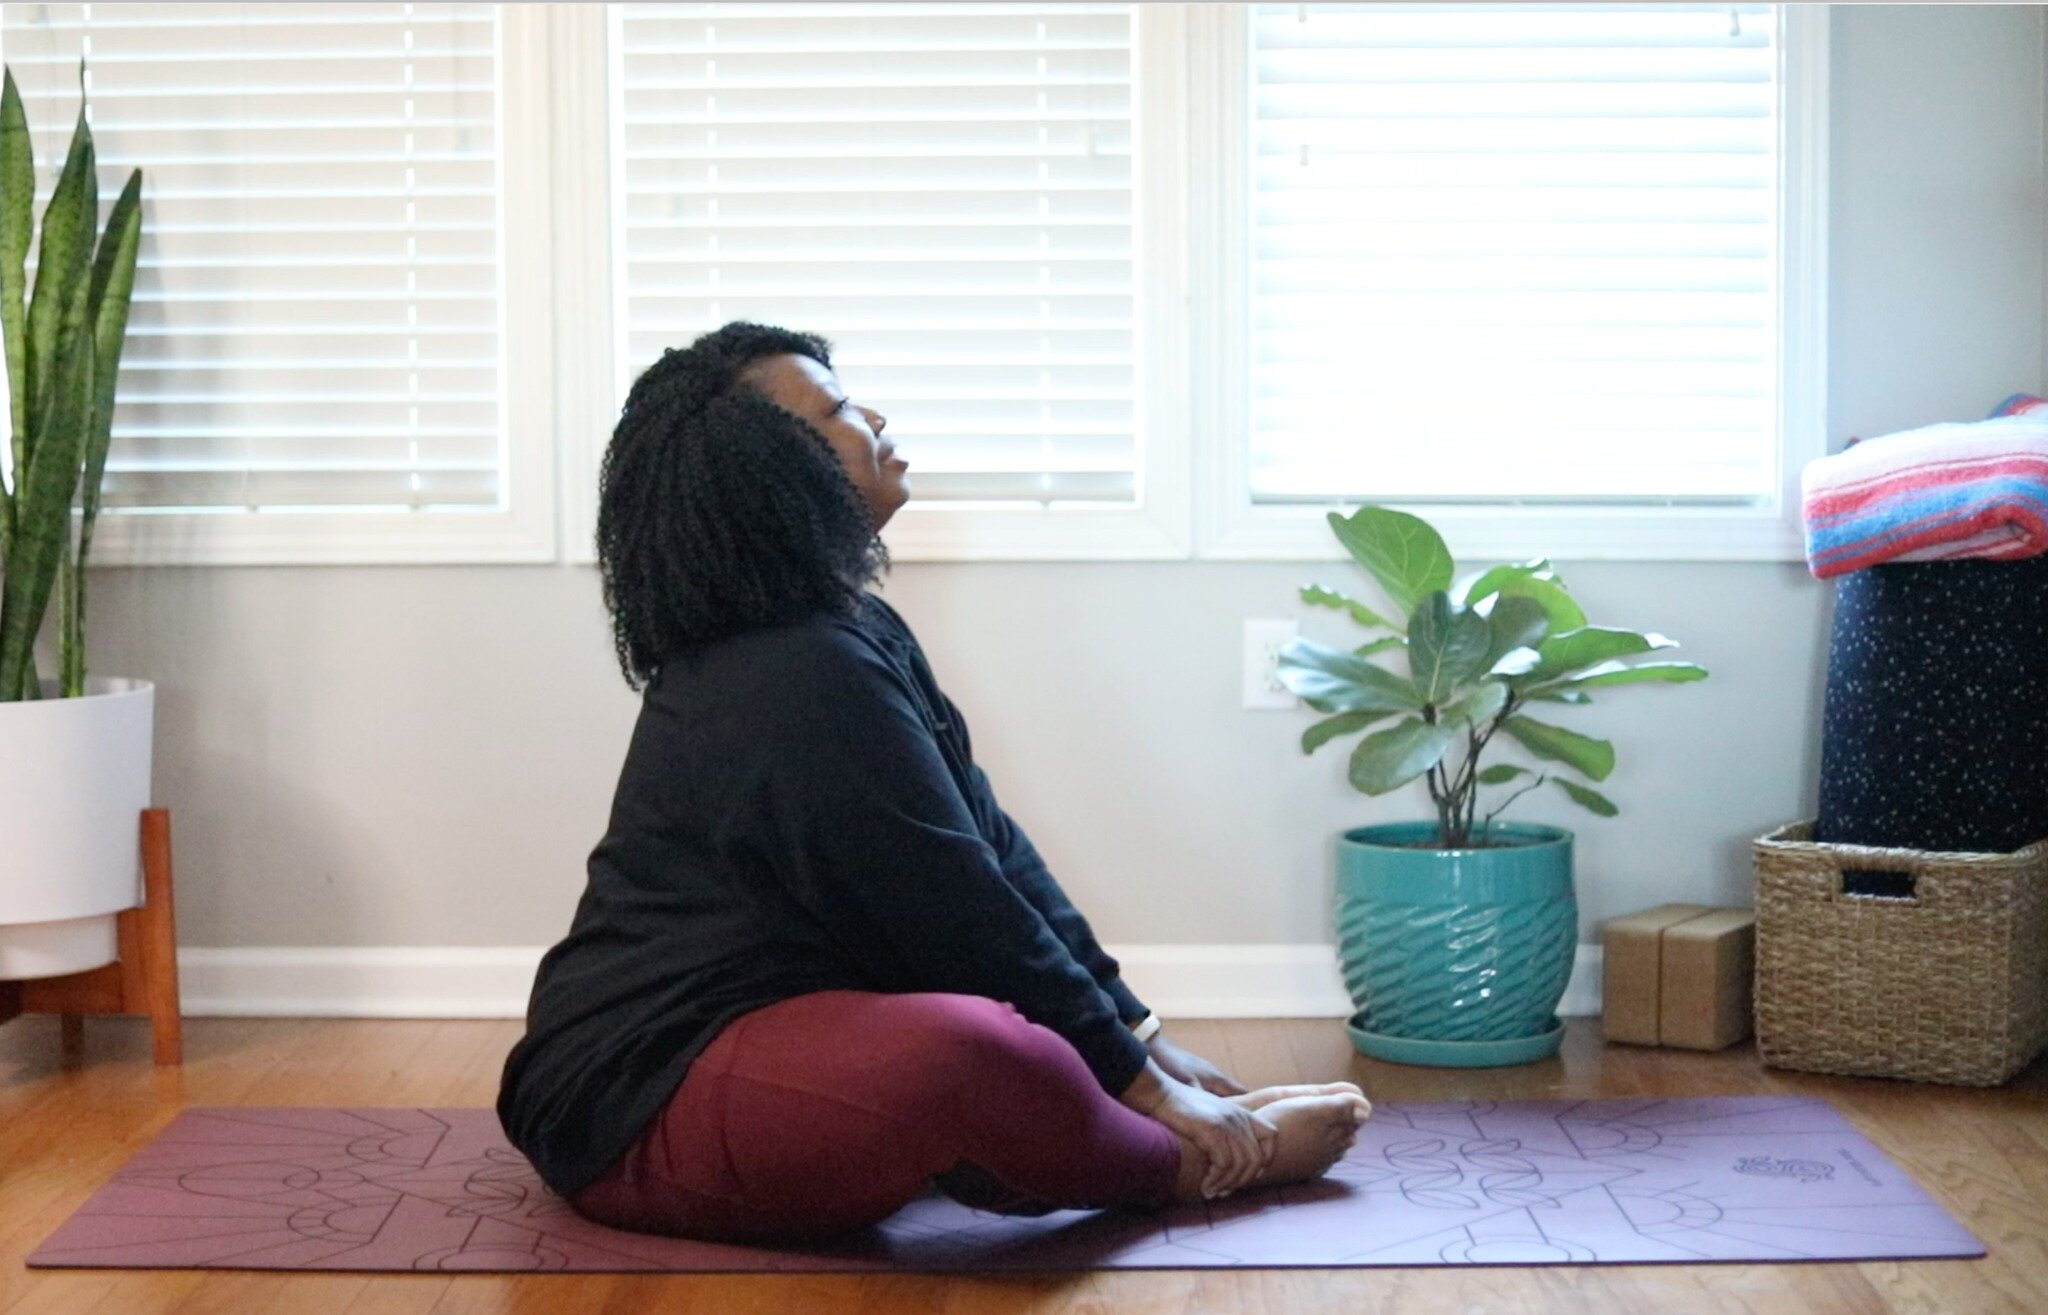 Need a gentle practice to ease into your day? Find your inner calm and release tension with a 20-minute gentle seated yin yoga practice. No props required. Link in bio!
.
.
.
#morningyoga #yinyoga #morningyin #yogaforeverybody #blackyogateacher #seat